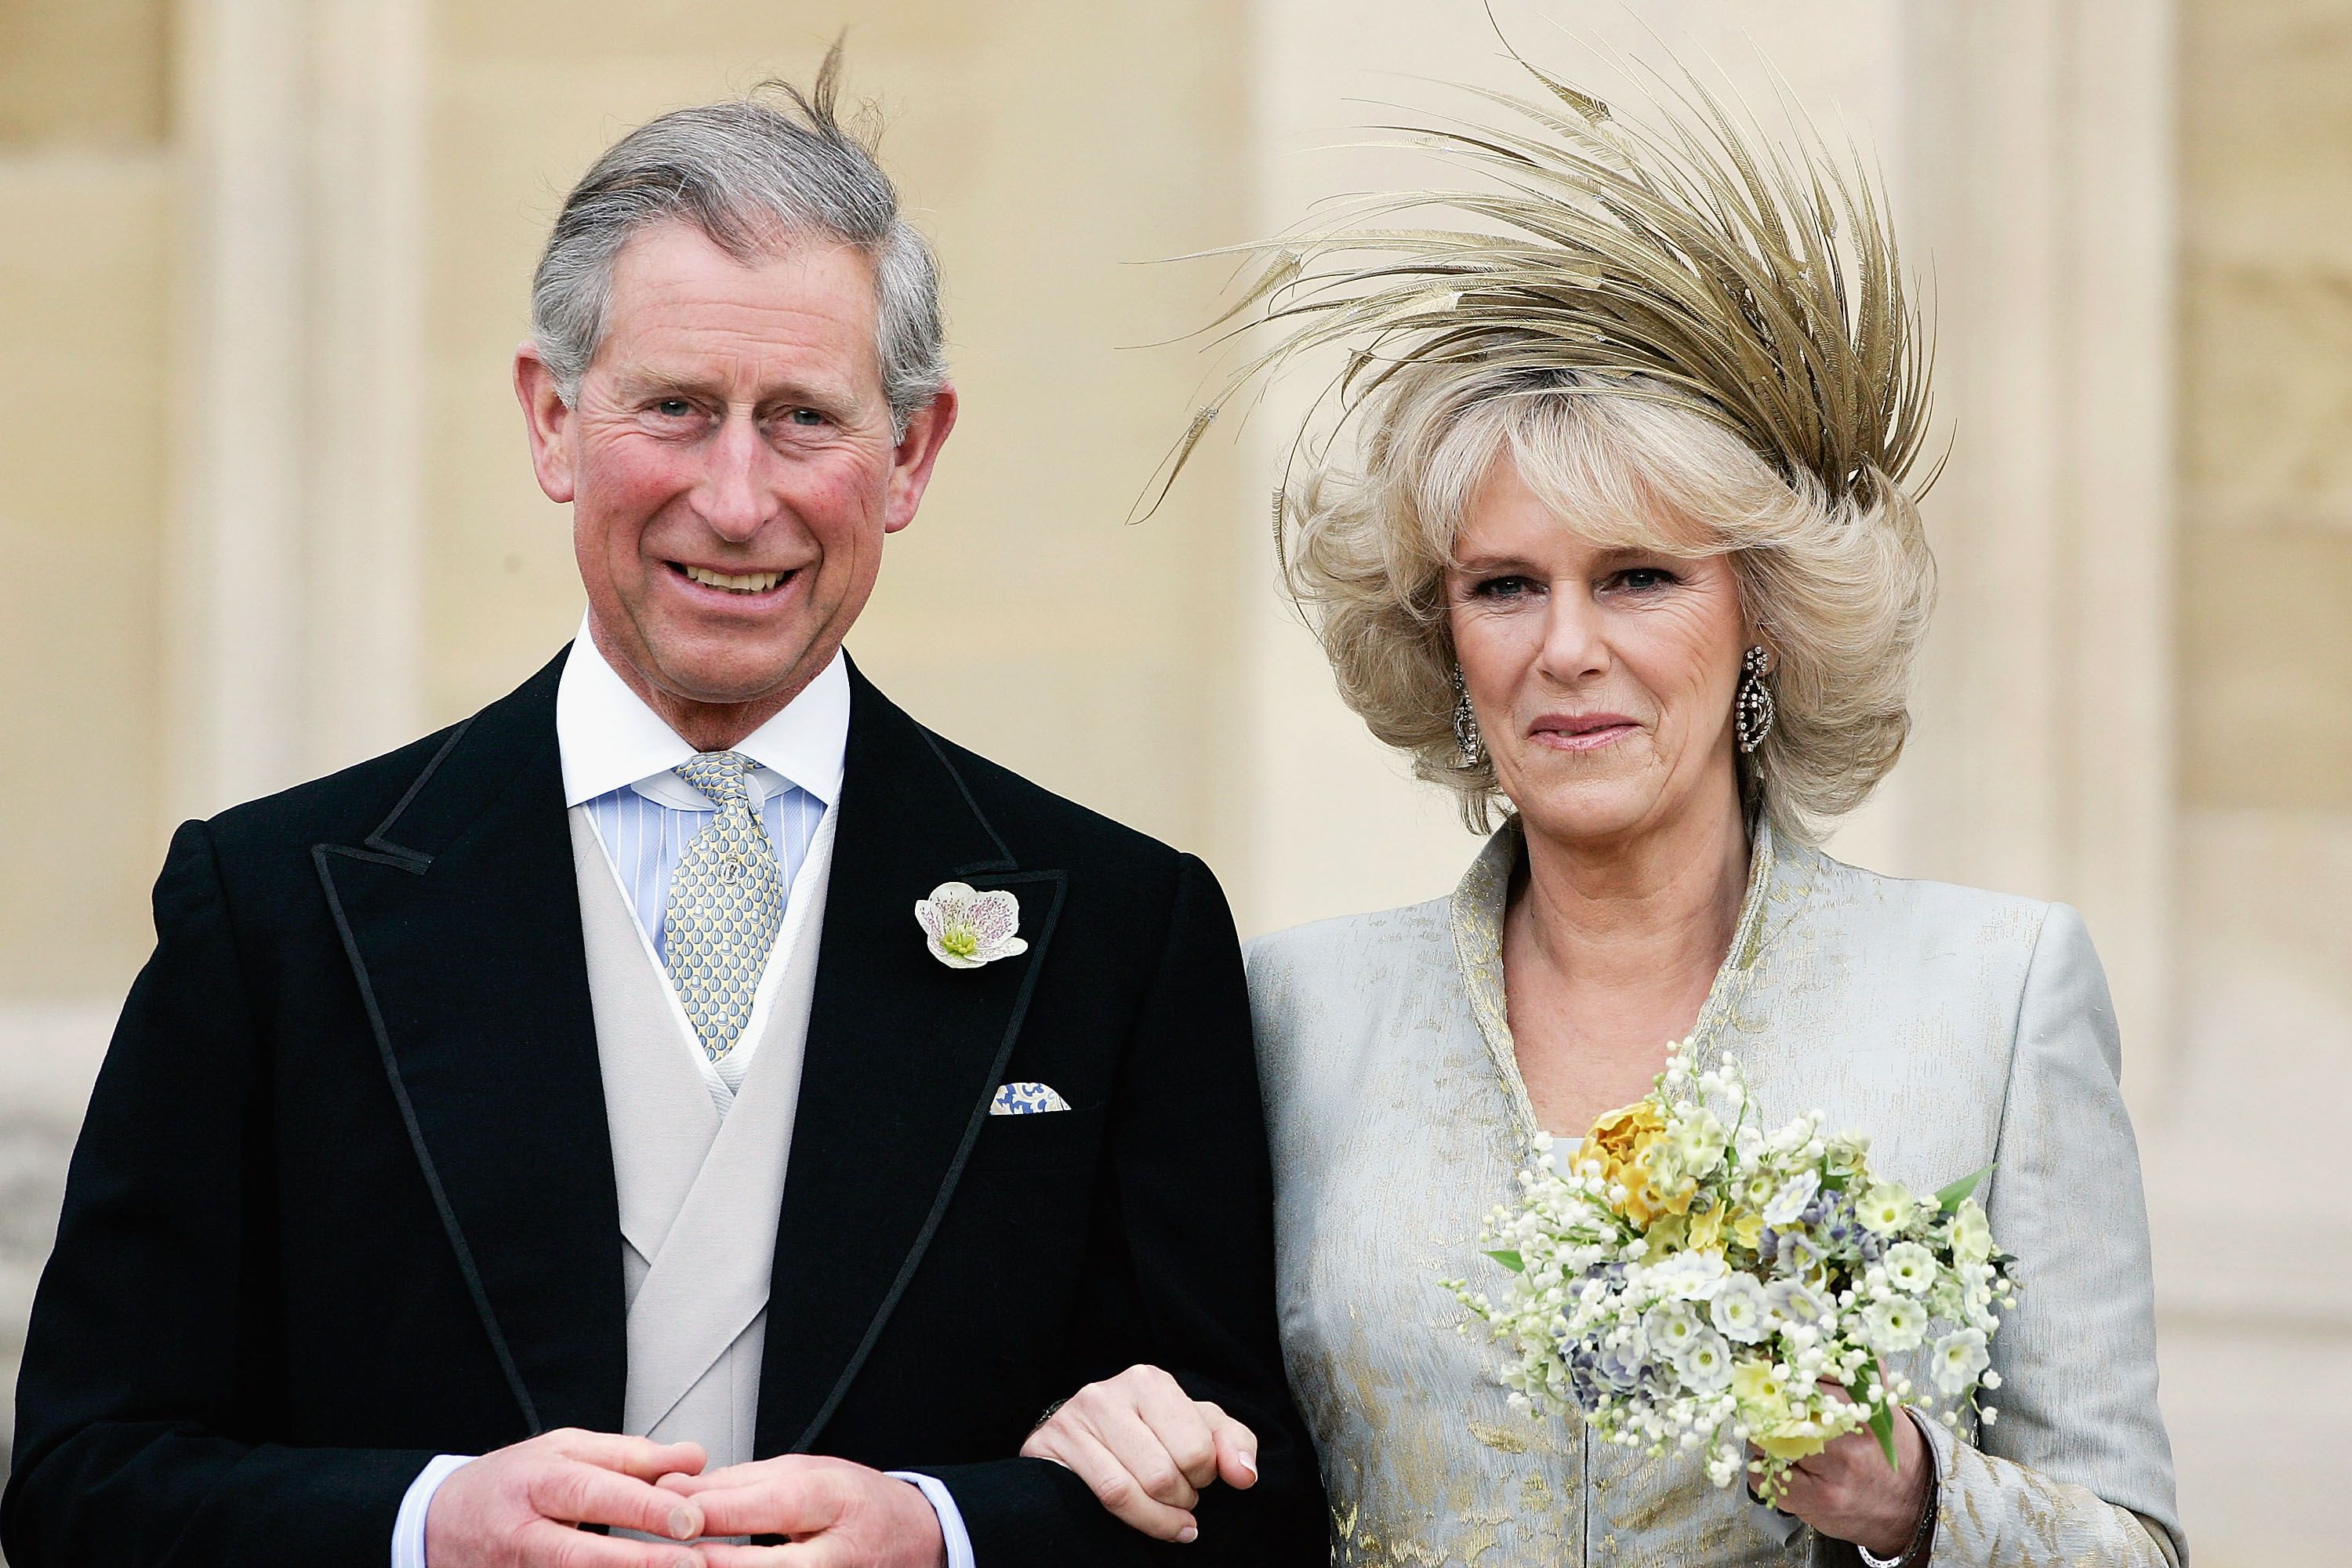 Prince Charles and Duchess Camilla during the Service of Prayer and Dedication blessing their marriage at Windsor Castle on April 9, 2005, in Berkshire, England. | Source: Getty Images